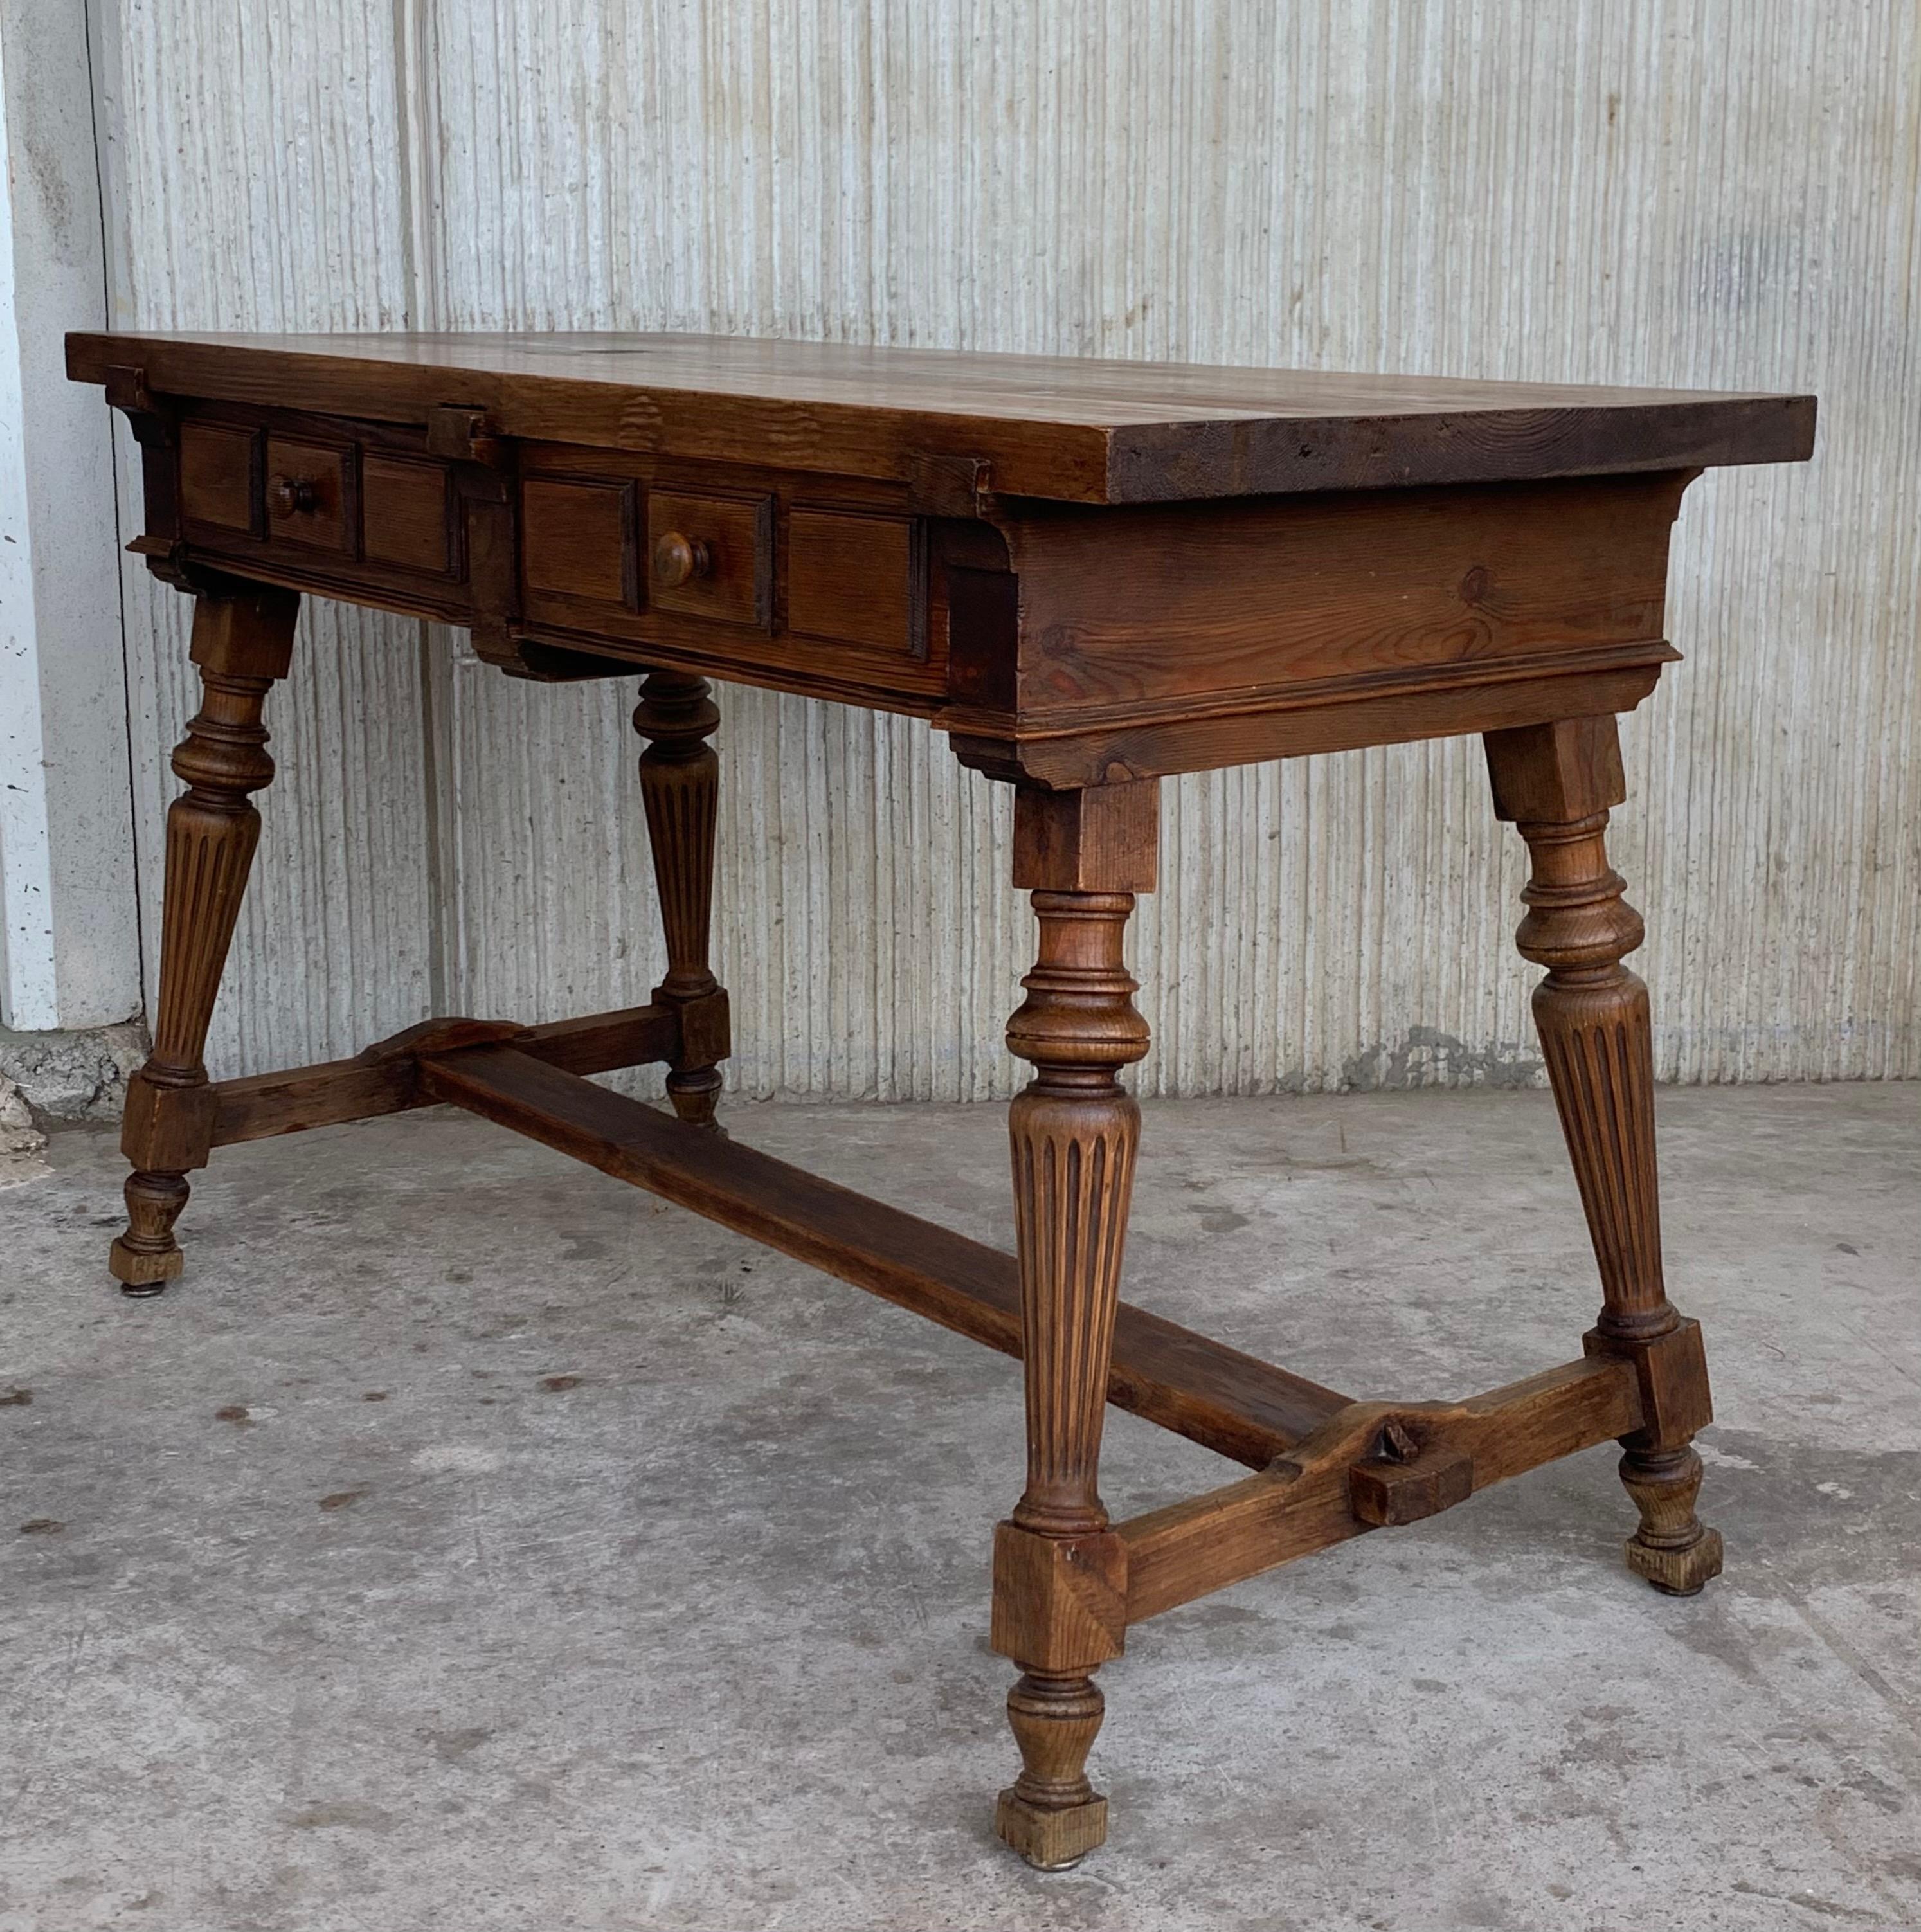 Spanish 19th Century Solid Oak Baroque Fluted Legs Desk Writing Table or Console For Sale